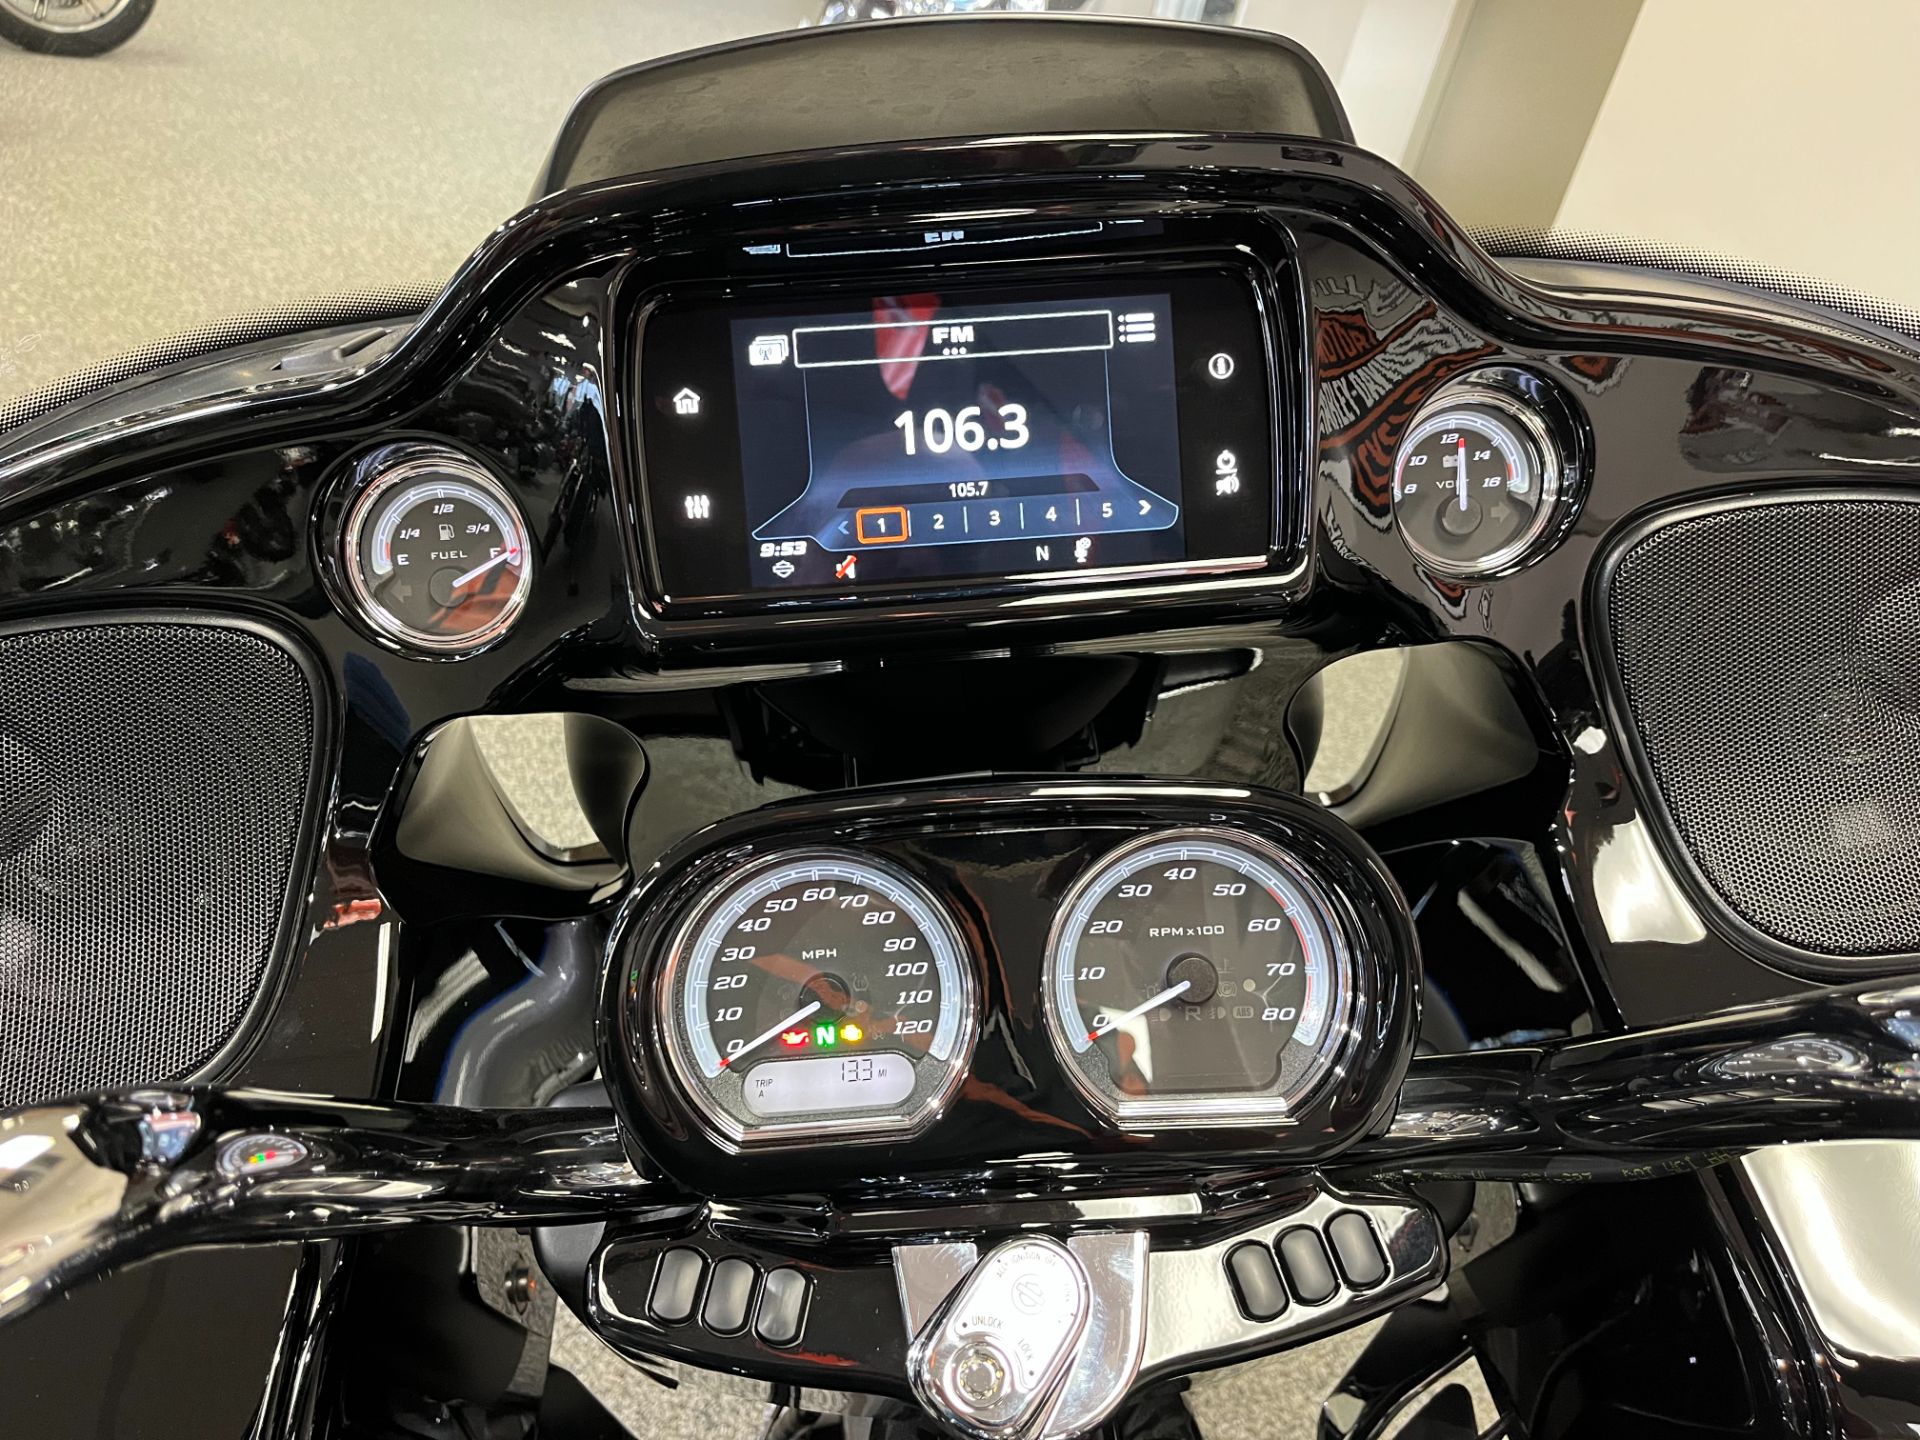 2022 Harley-Davidson ROAD GLIDE LIMITED in Knoxville, Tennessee - Photo 11